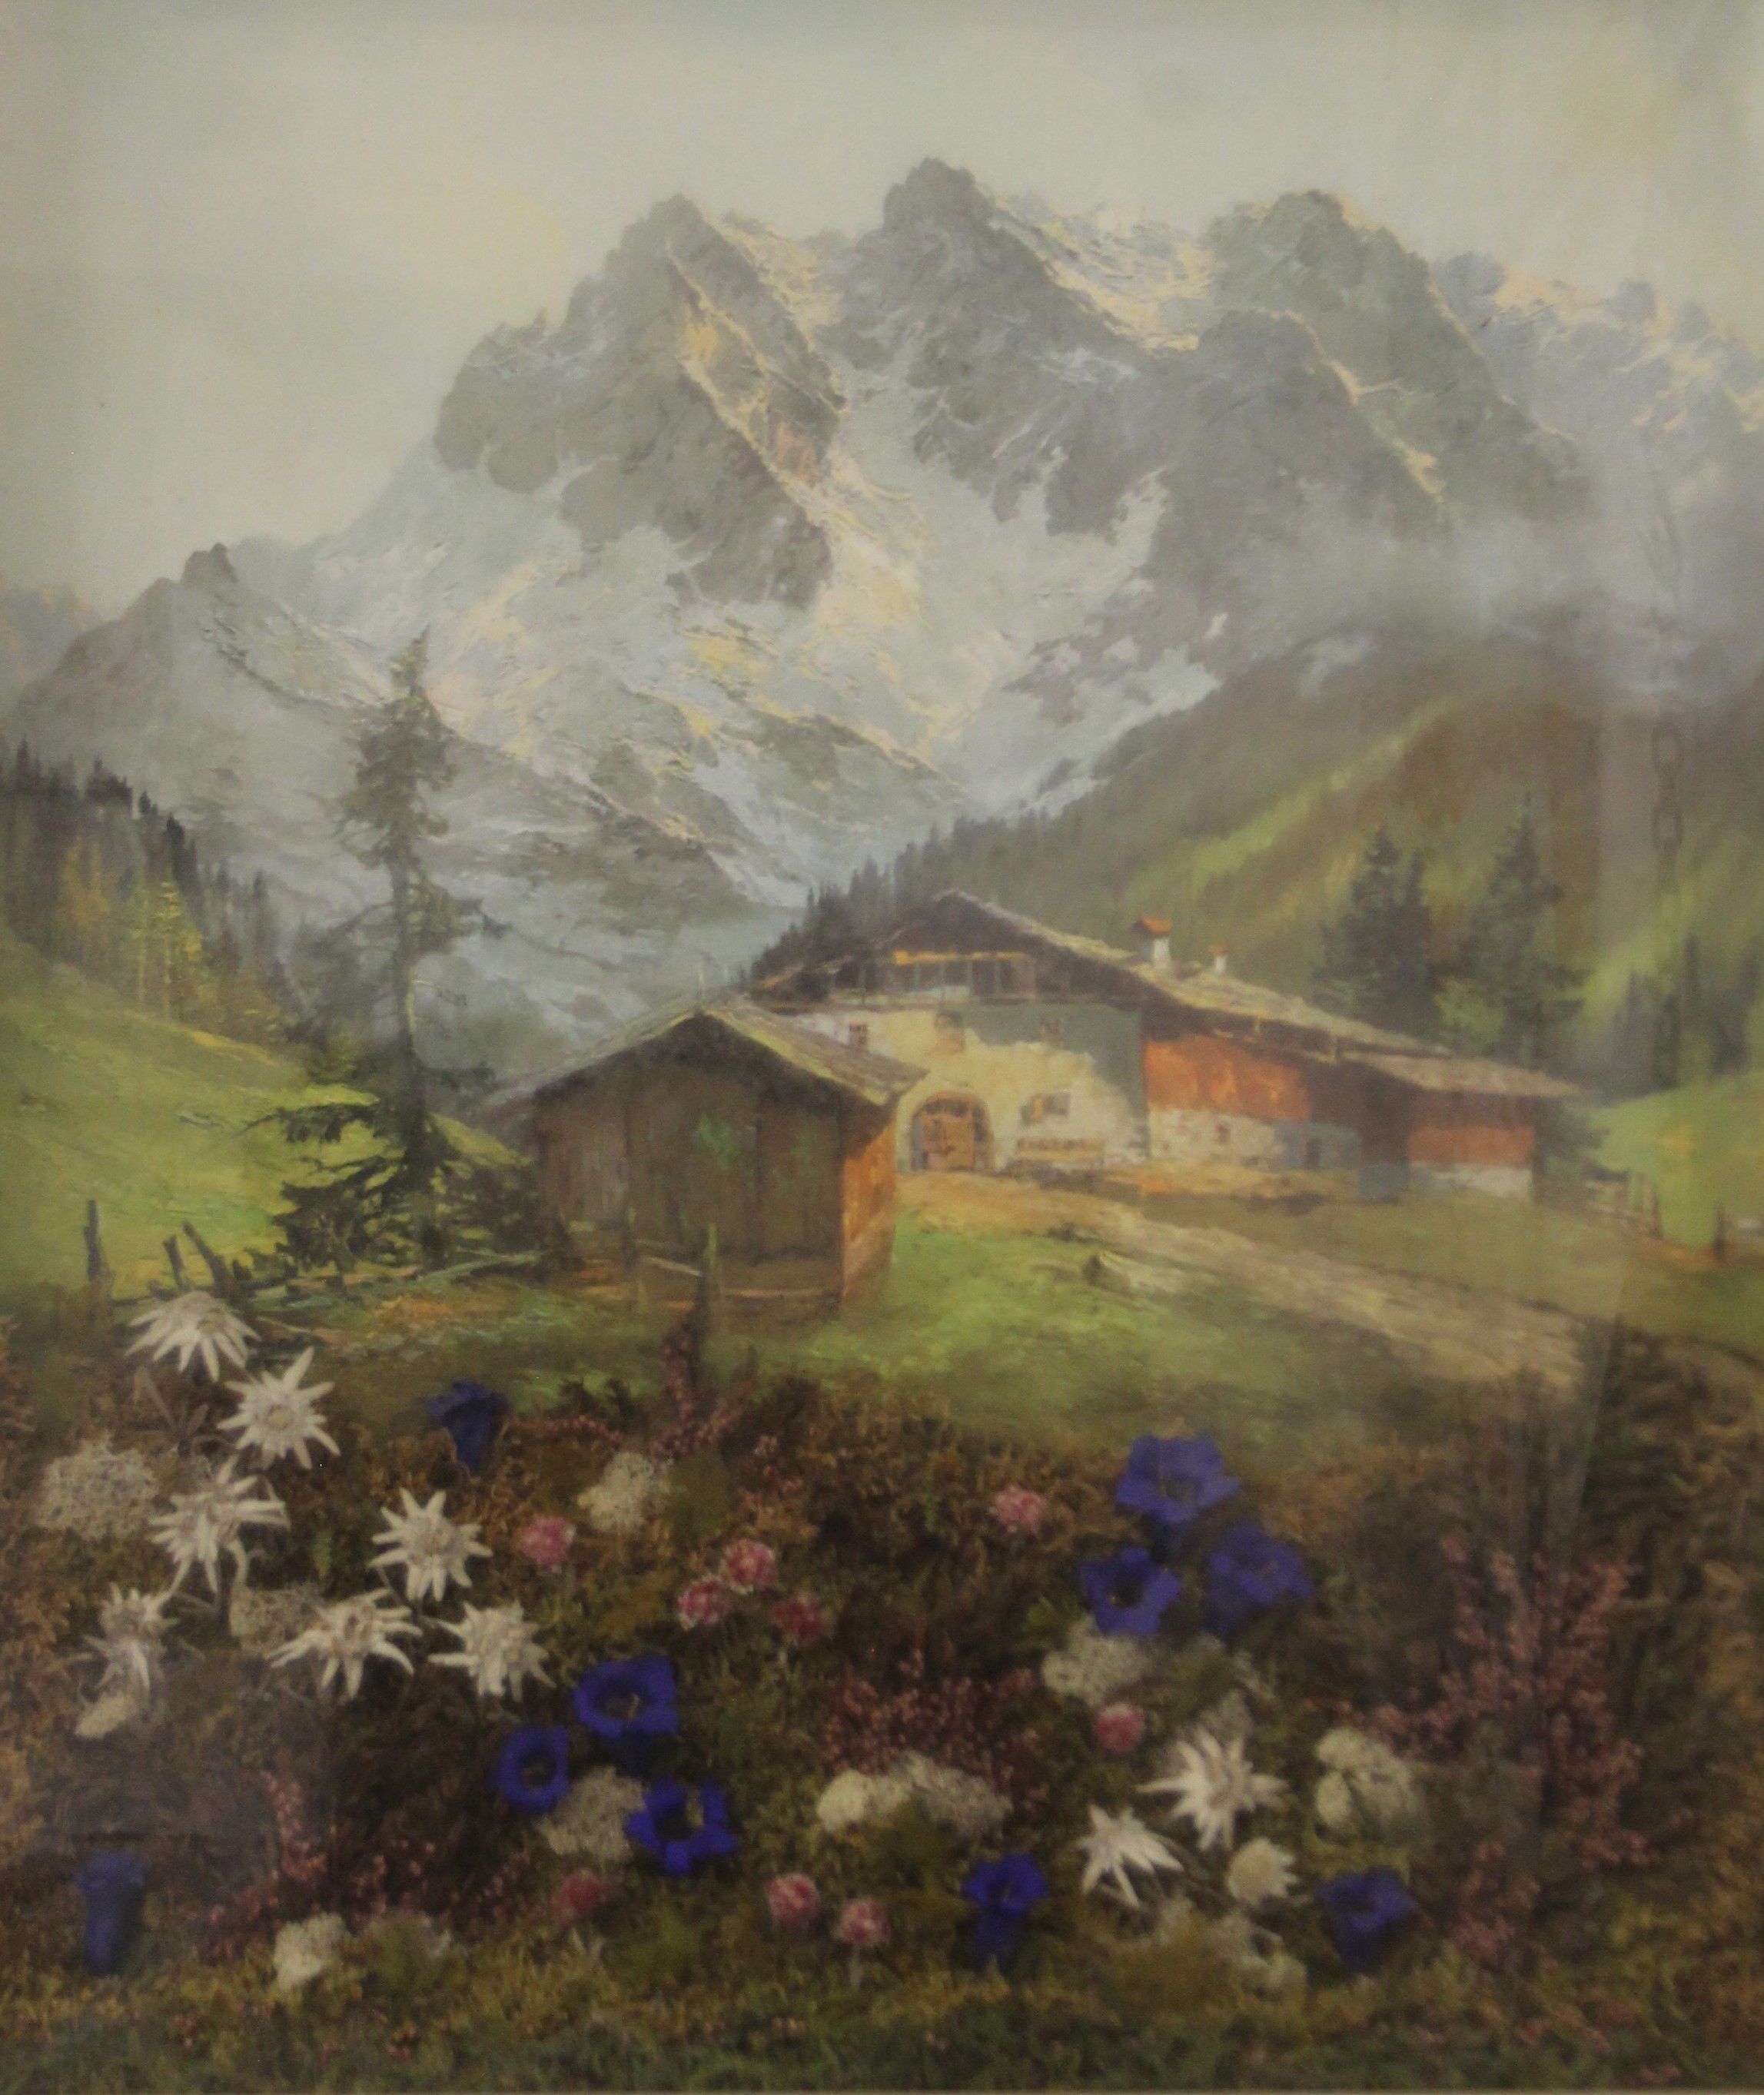 A kitsch print and collage of an Alpine scene, framed and glazed. 61.5 x 73.5 cm.